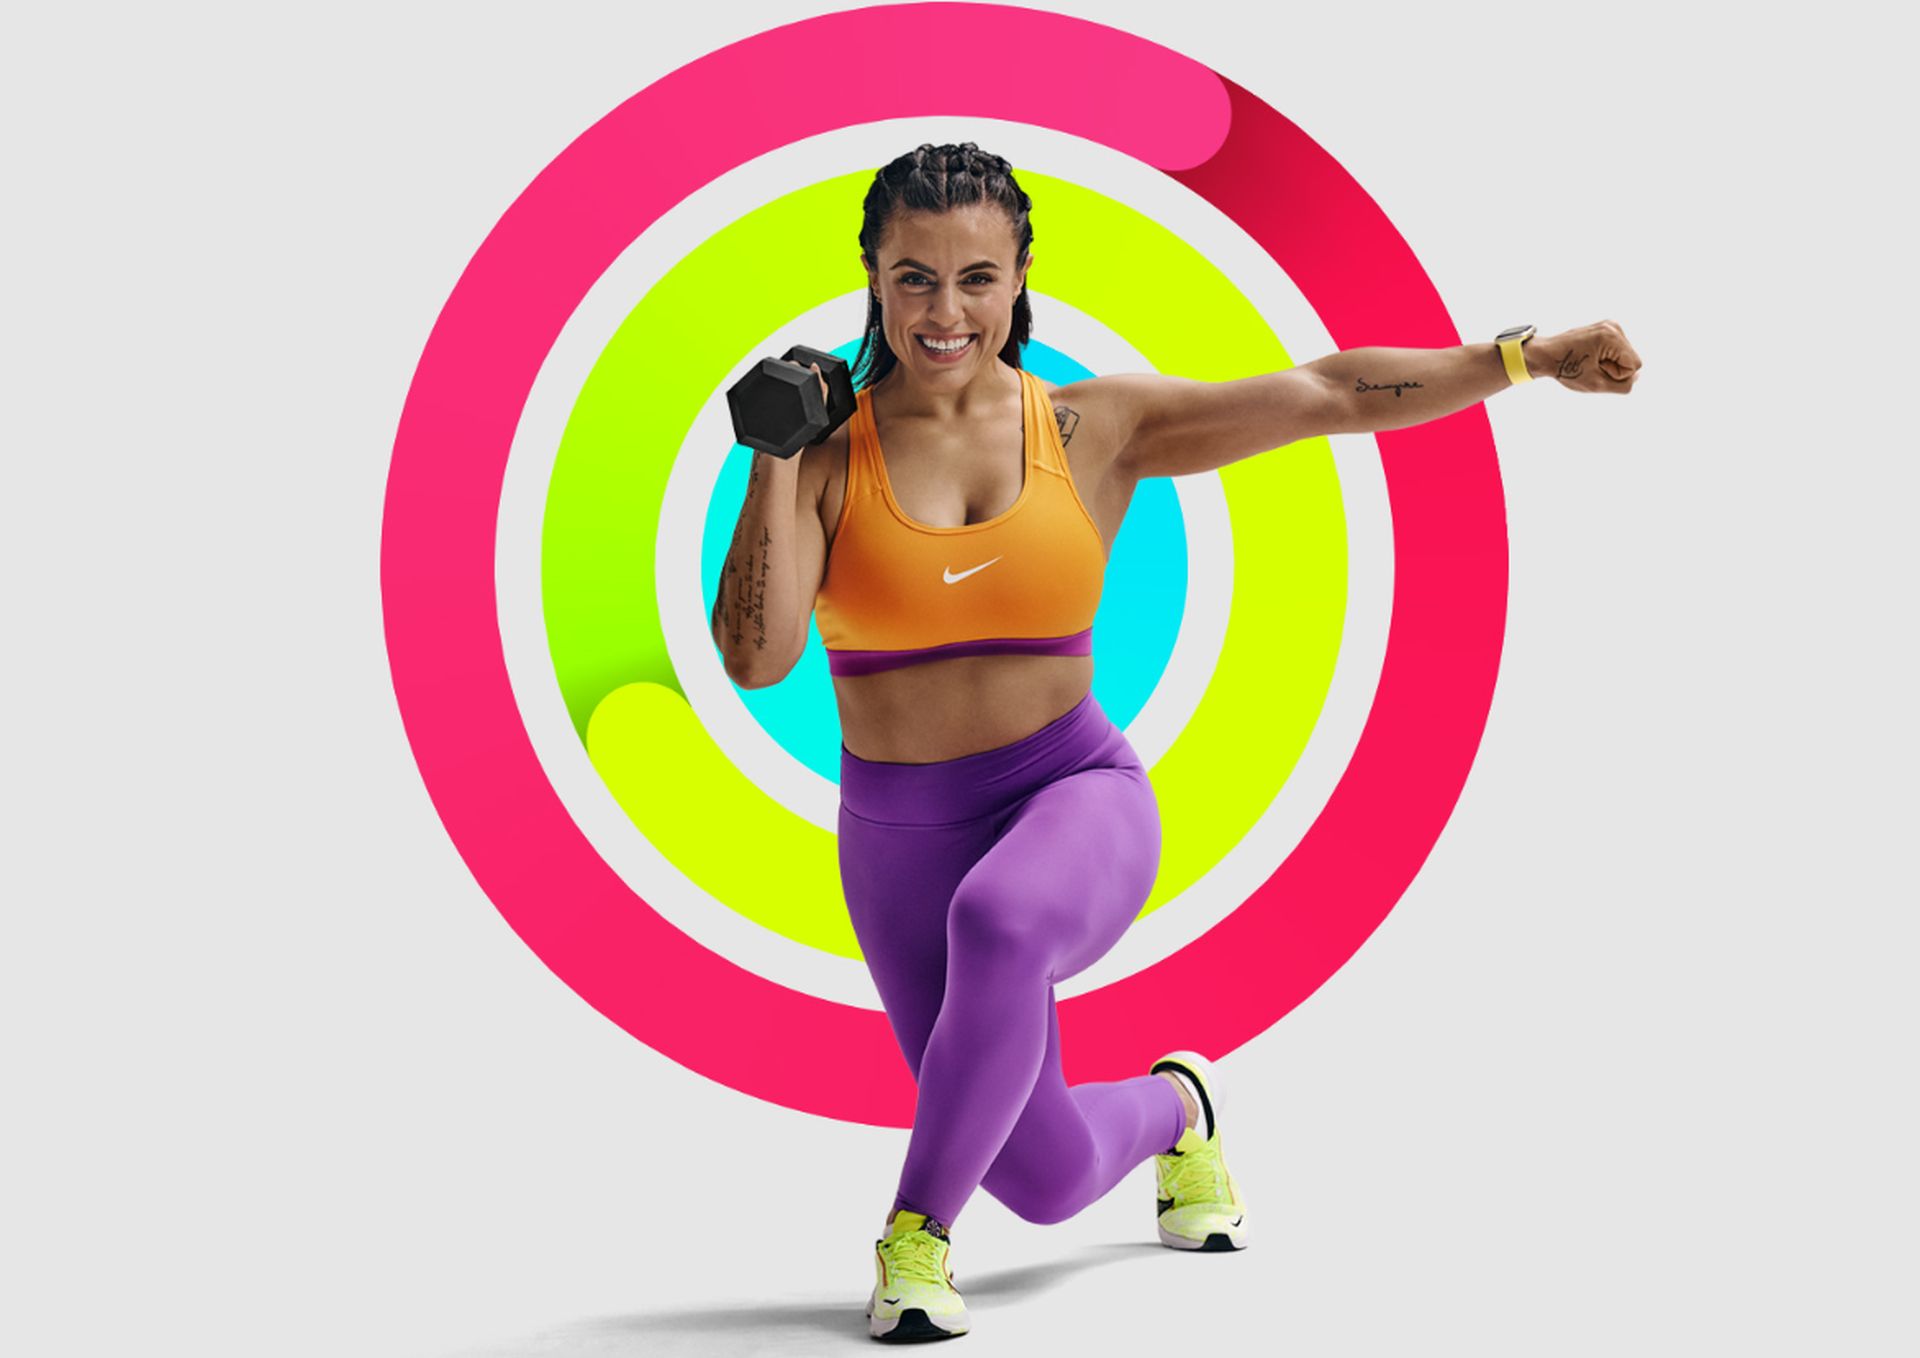 Apple Fitness Plus revamps workout options with Rihanna, Britney, and more